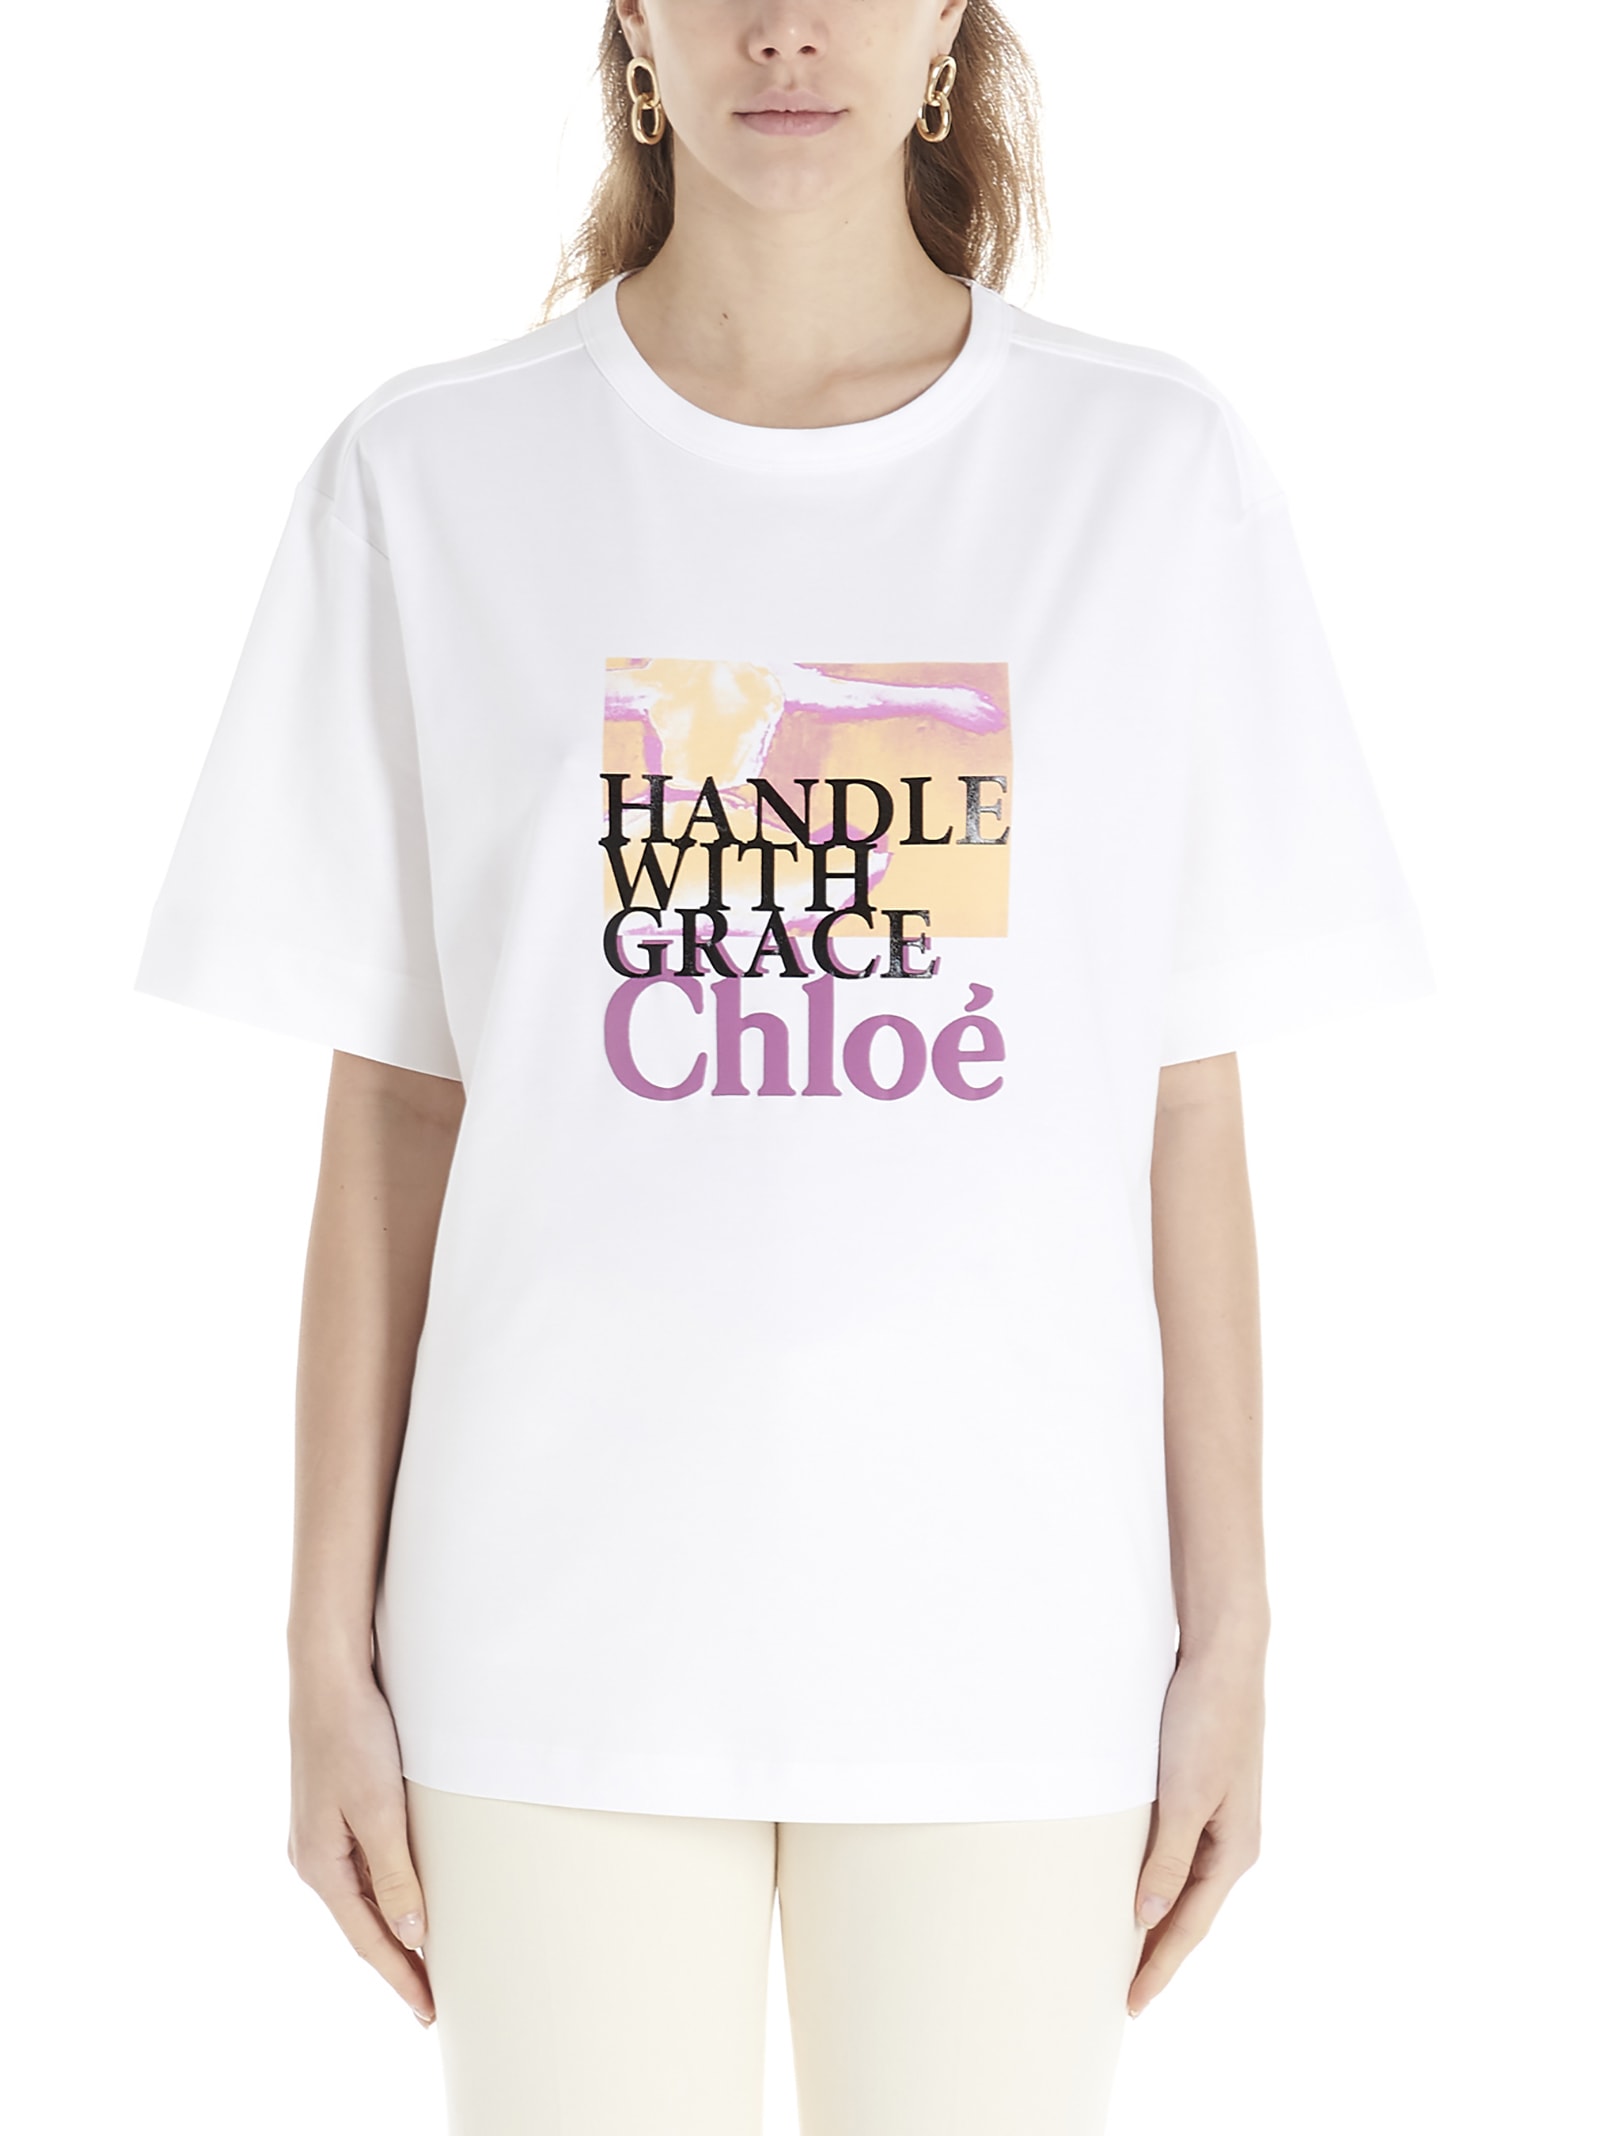 CHLOÉ BY THE GRACE OF OUR BODIES T-SHIRT,11296167